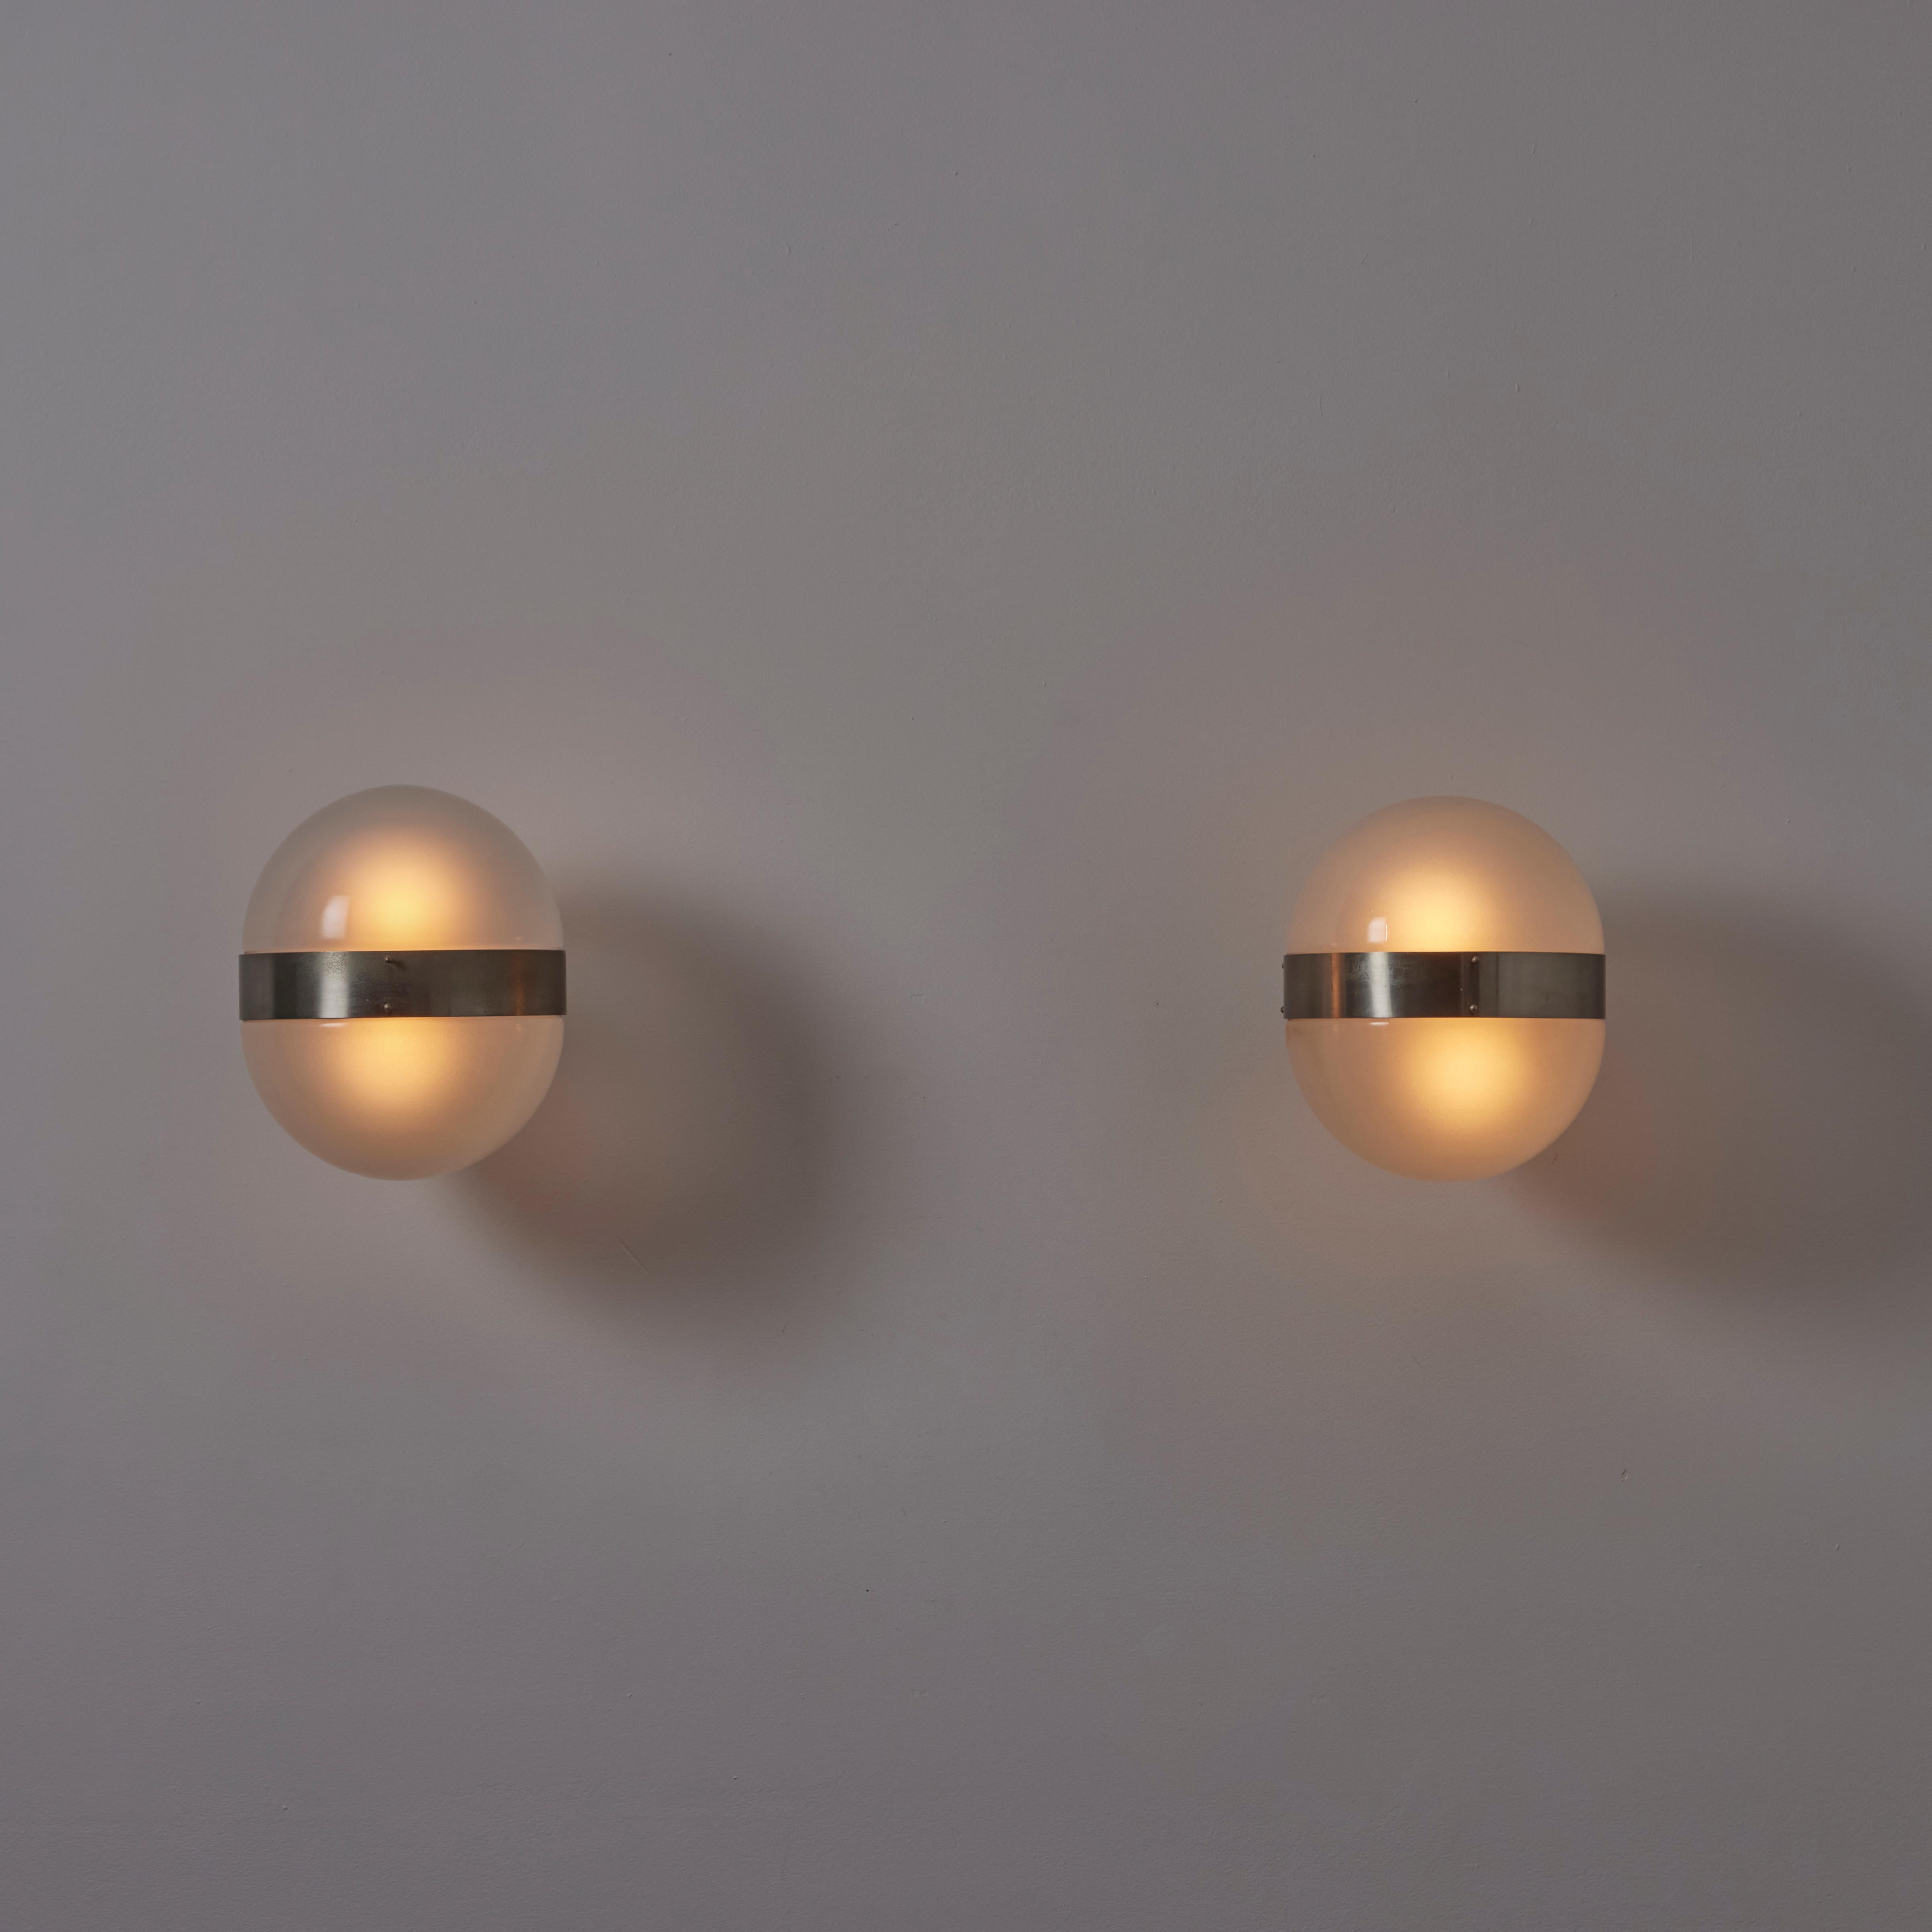 Mid-Century Modern Pair of Clio Flush Mounts by Sergio Mazza for Artemide